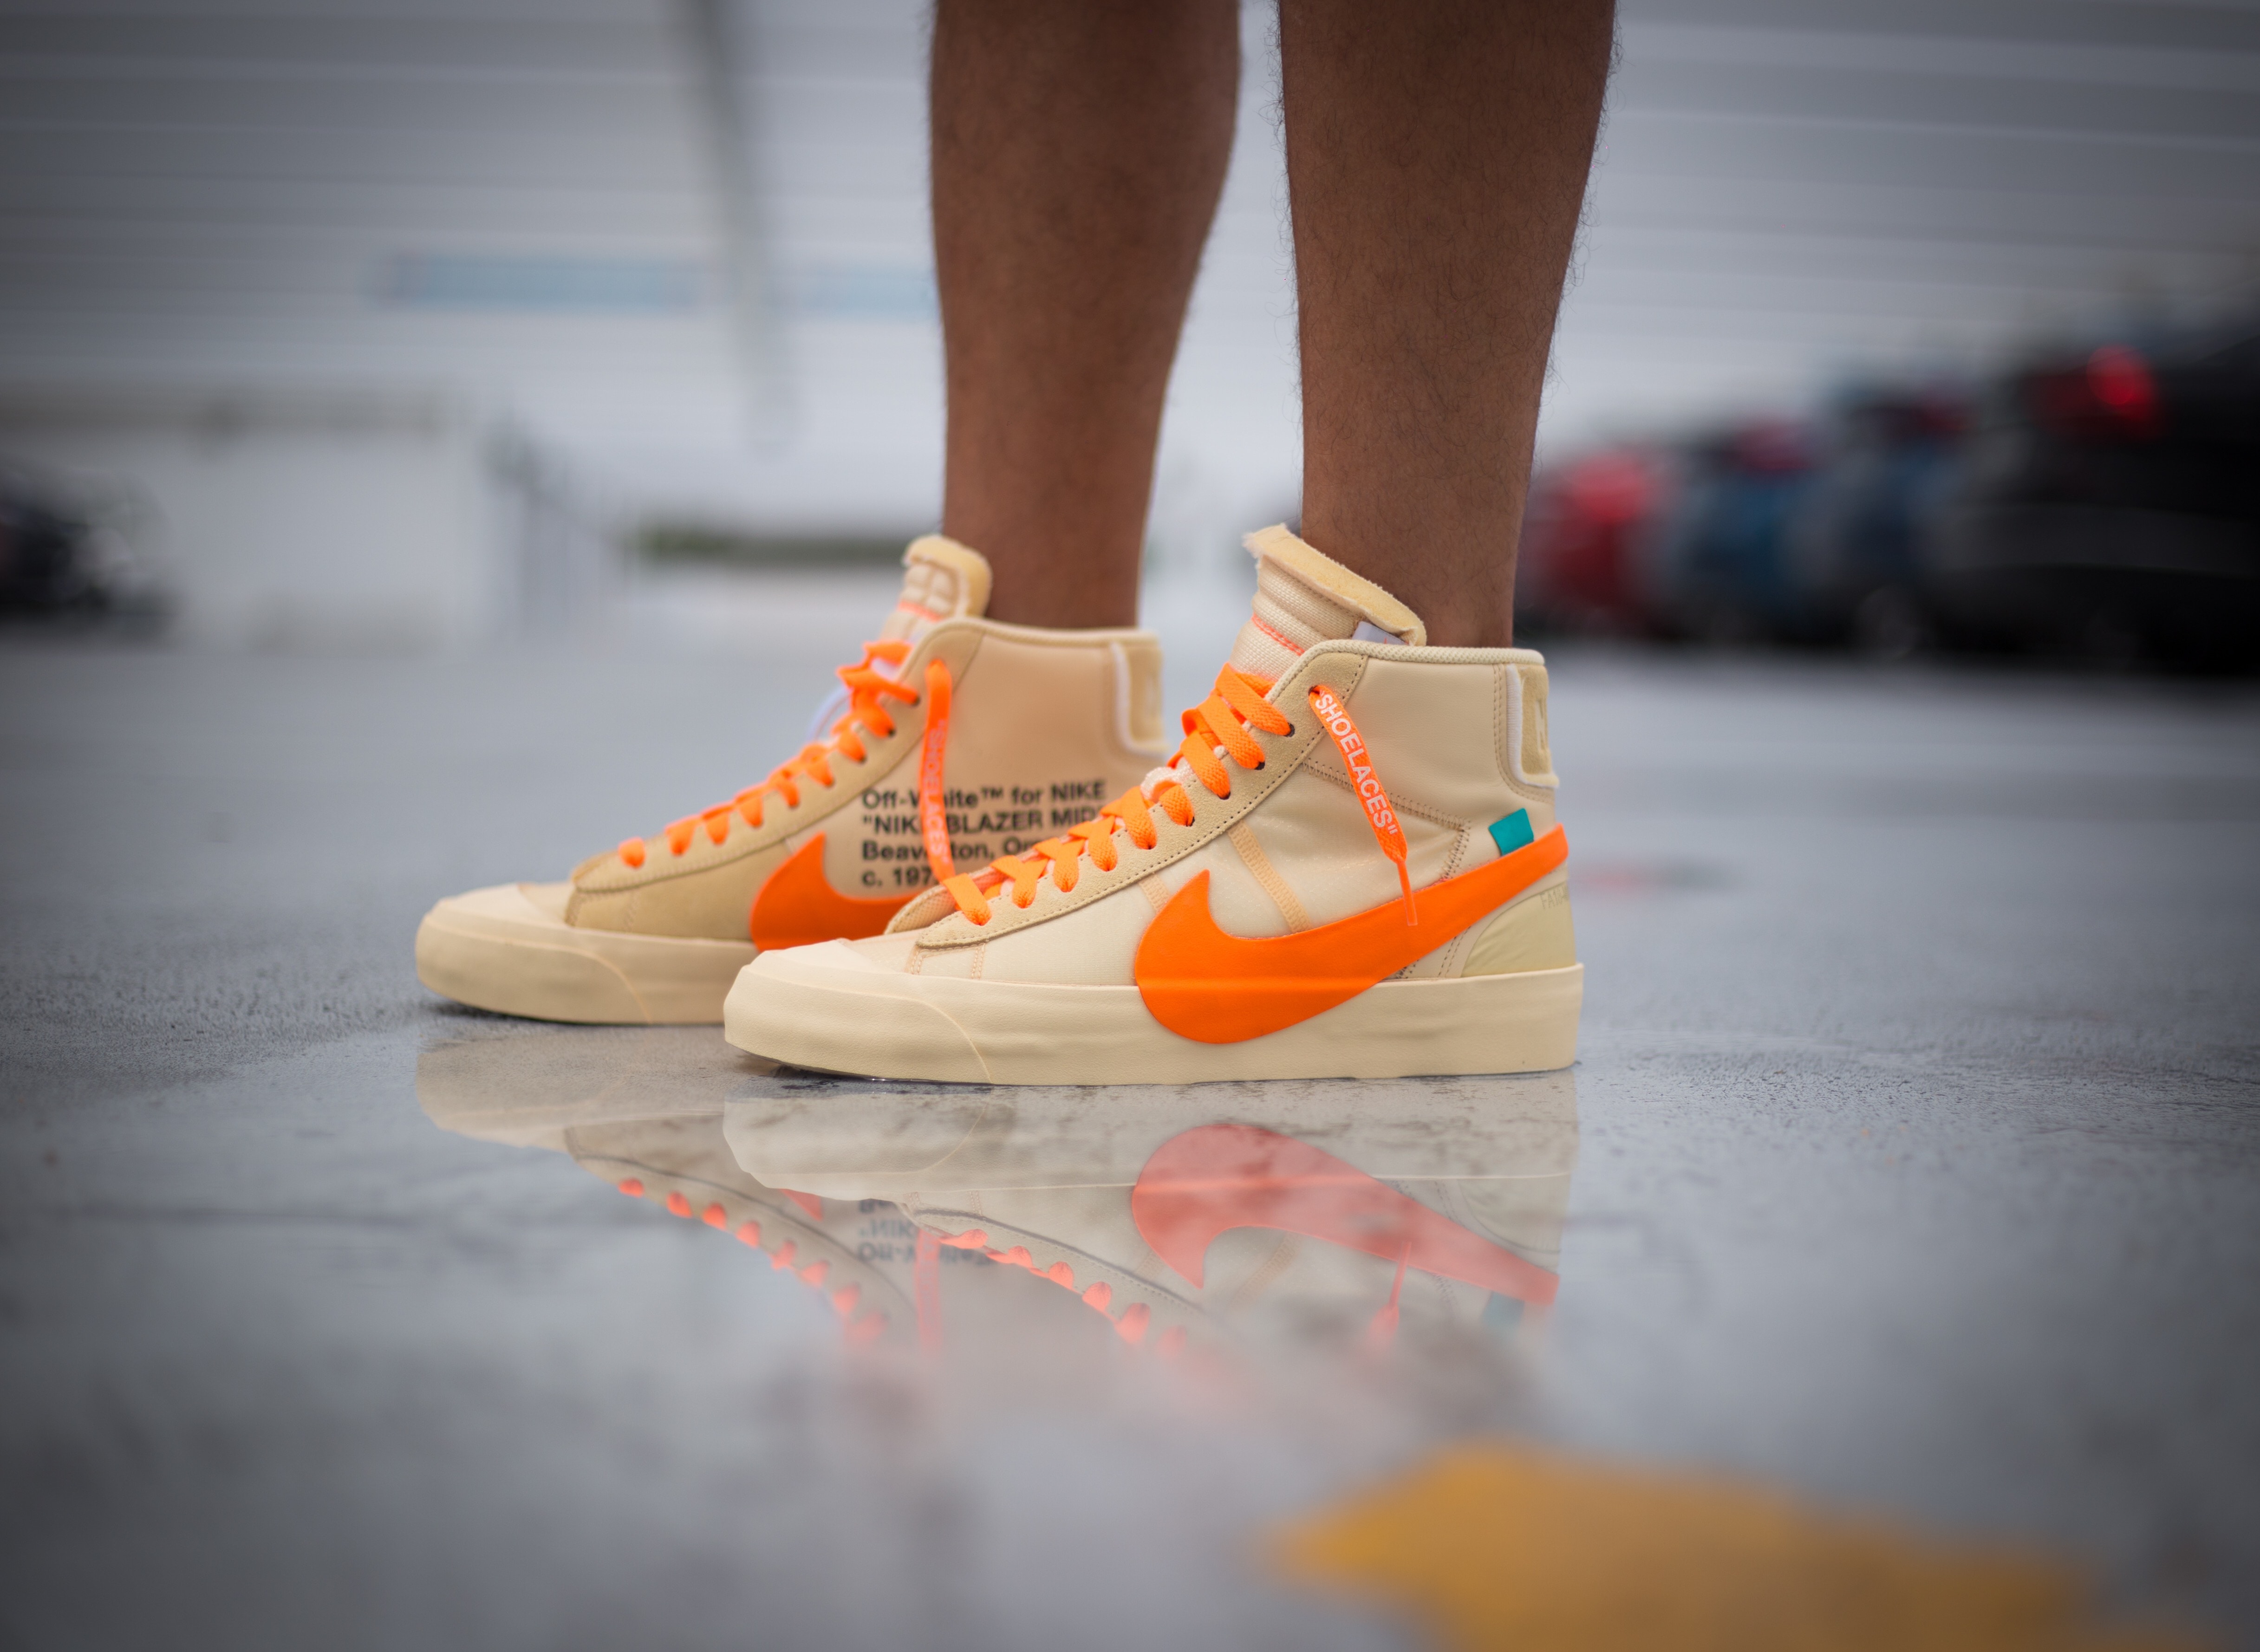 Off-White™ x Nike Blazer All Hallow's Eve On Foot